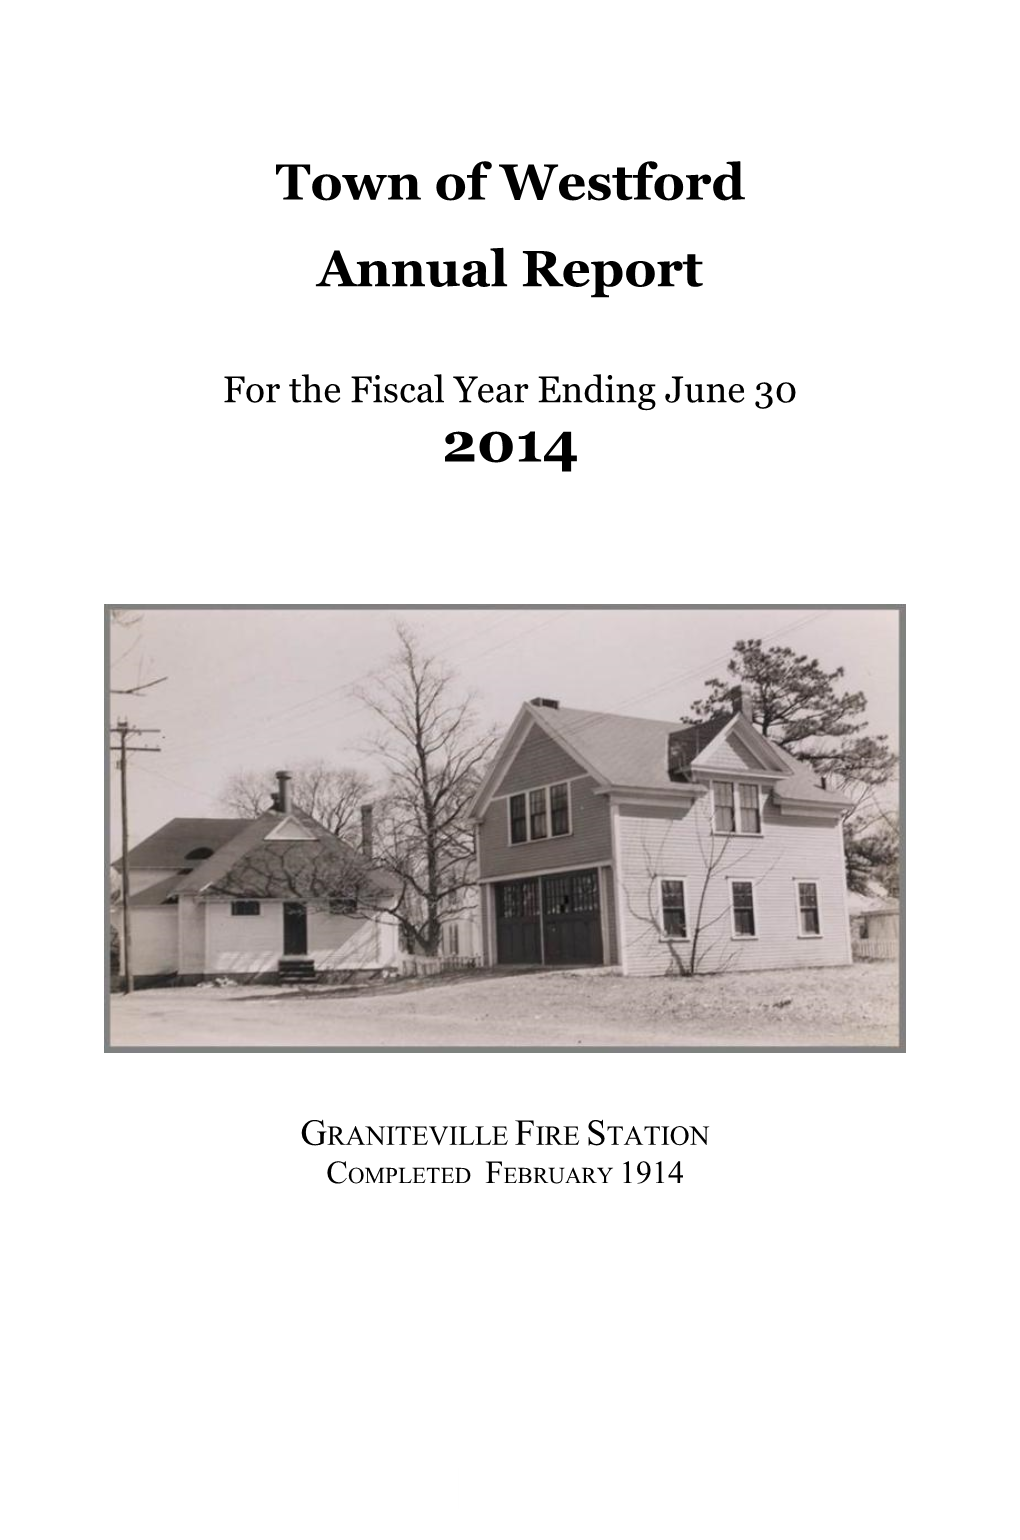 Town of Westford Annual Report